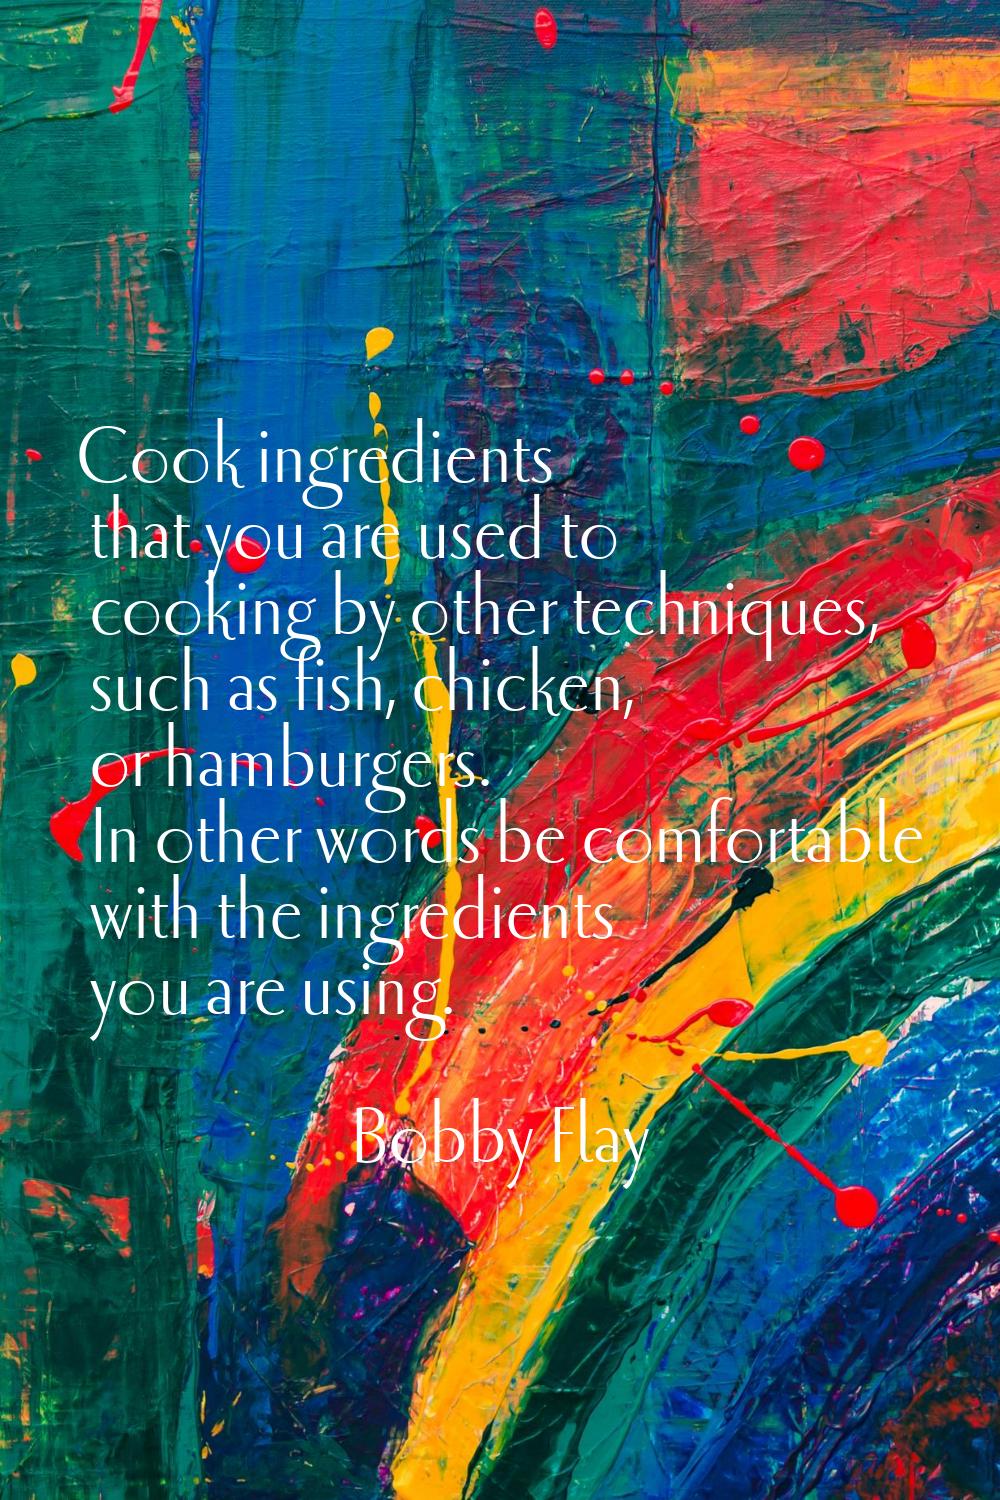 Cook ingredients that you are used to cooking by other techniques, such as fish, chicken, or hambur